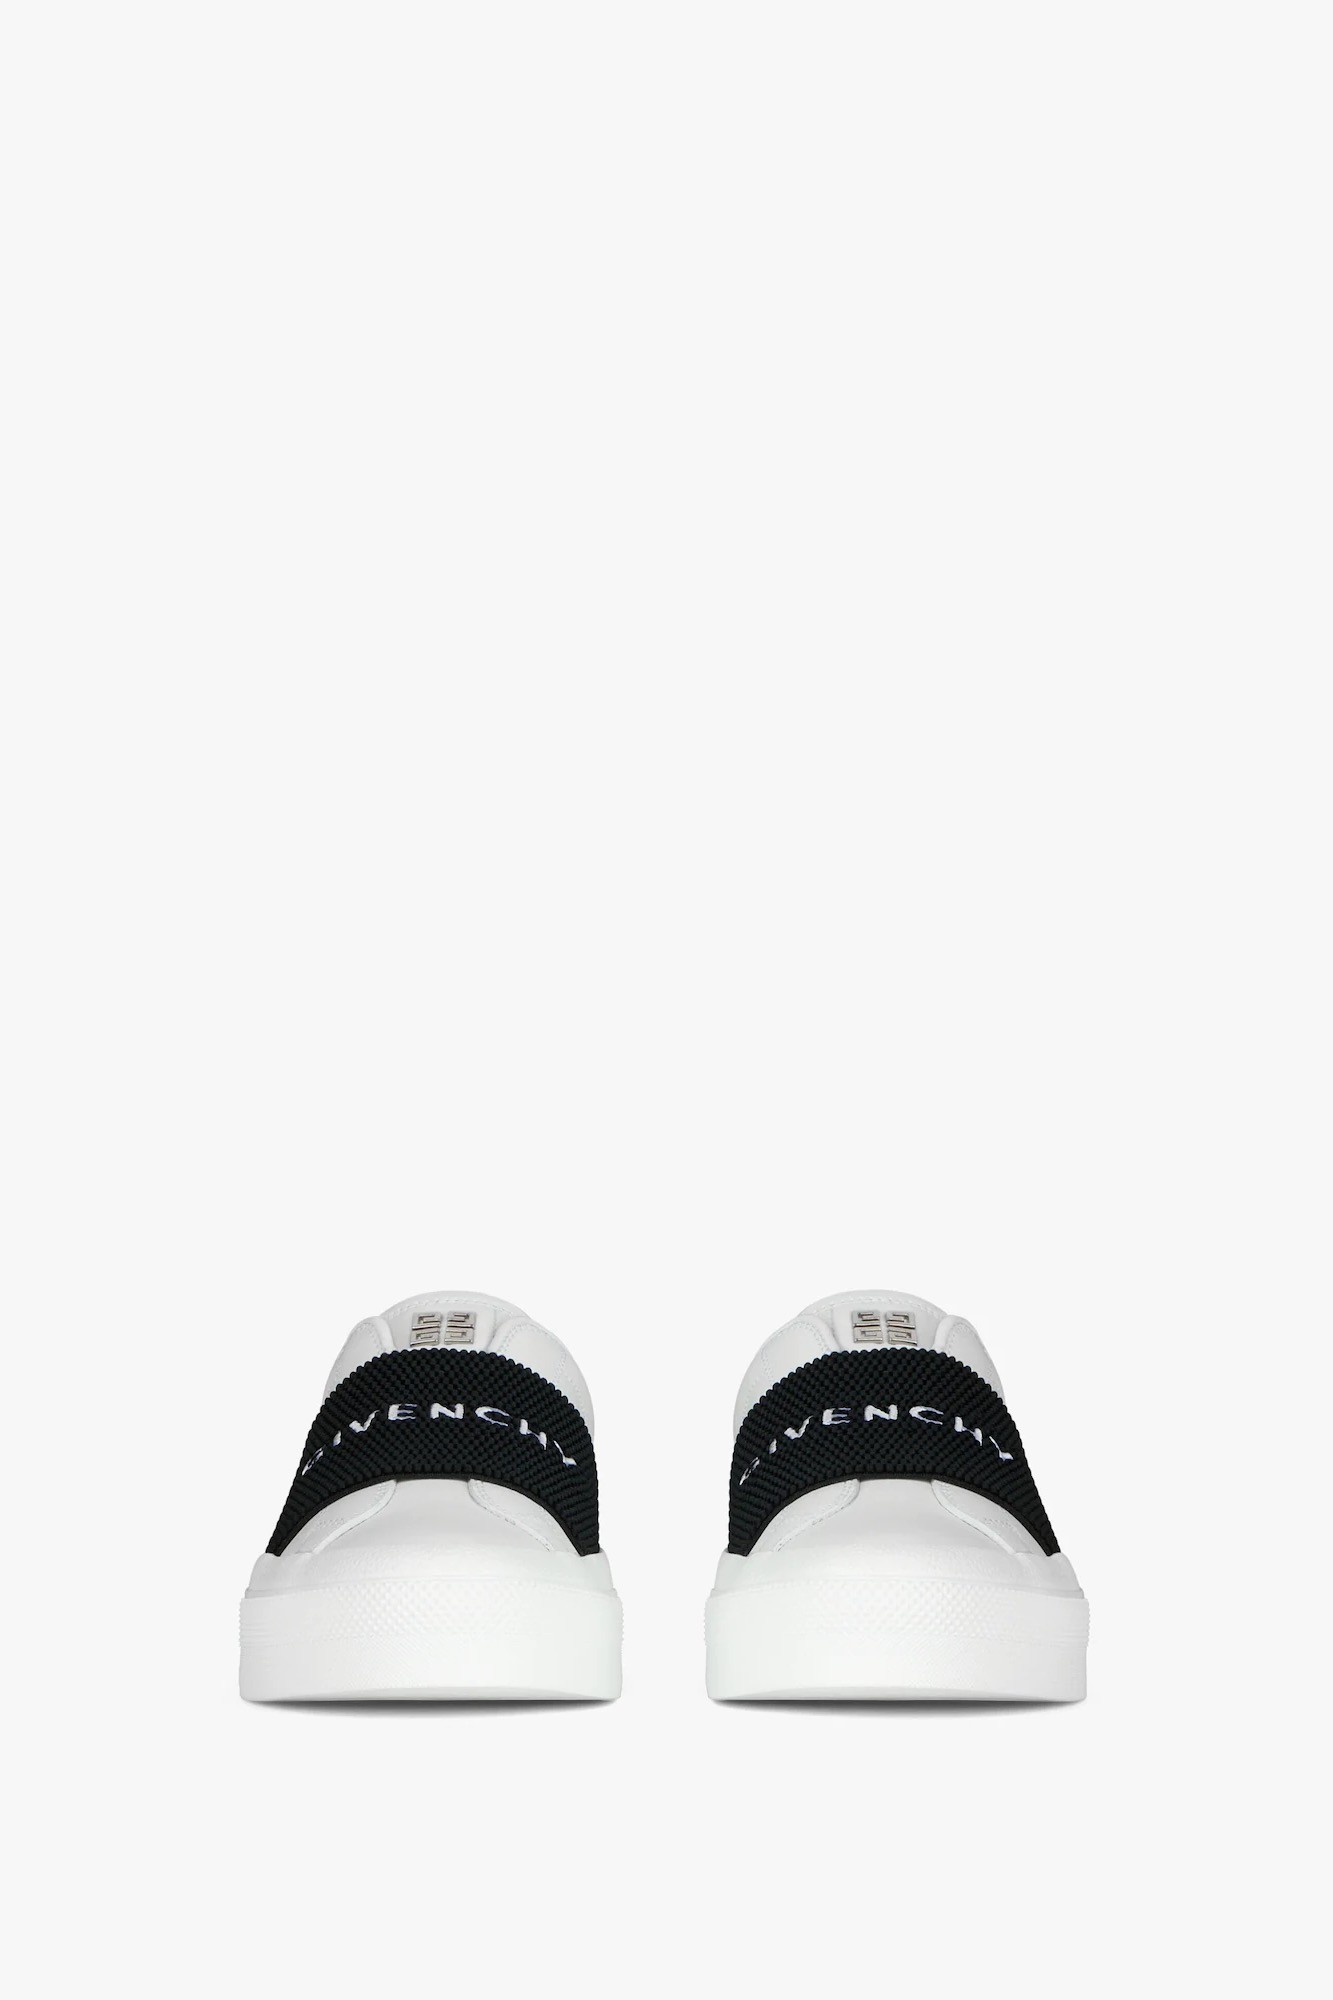 Sneakers In Leather With GIVENCHY Strap - white/black